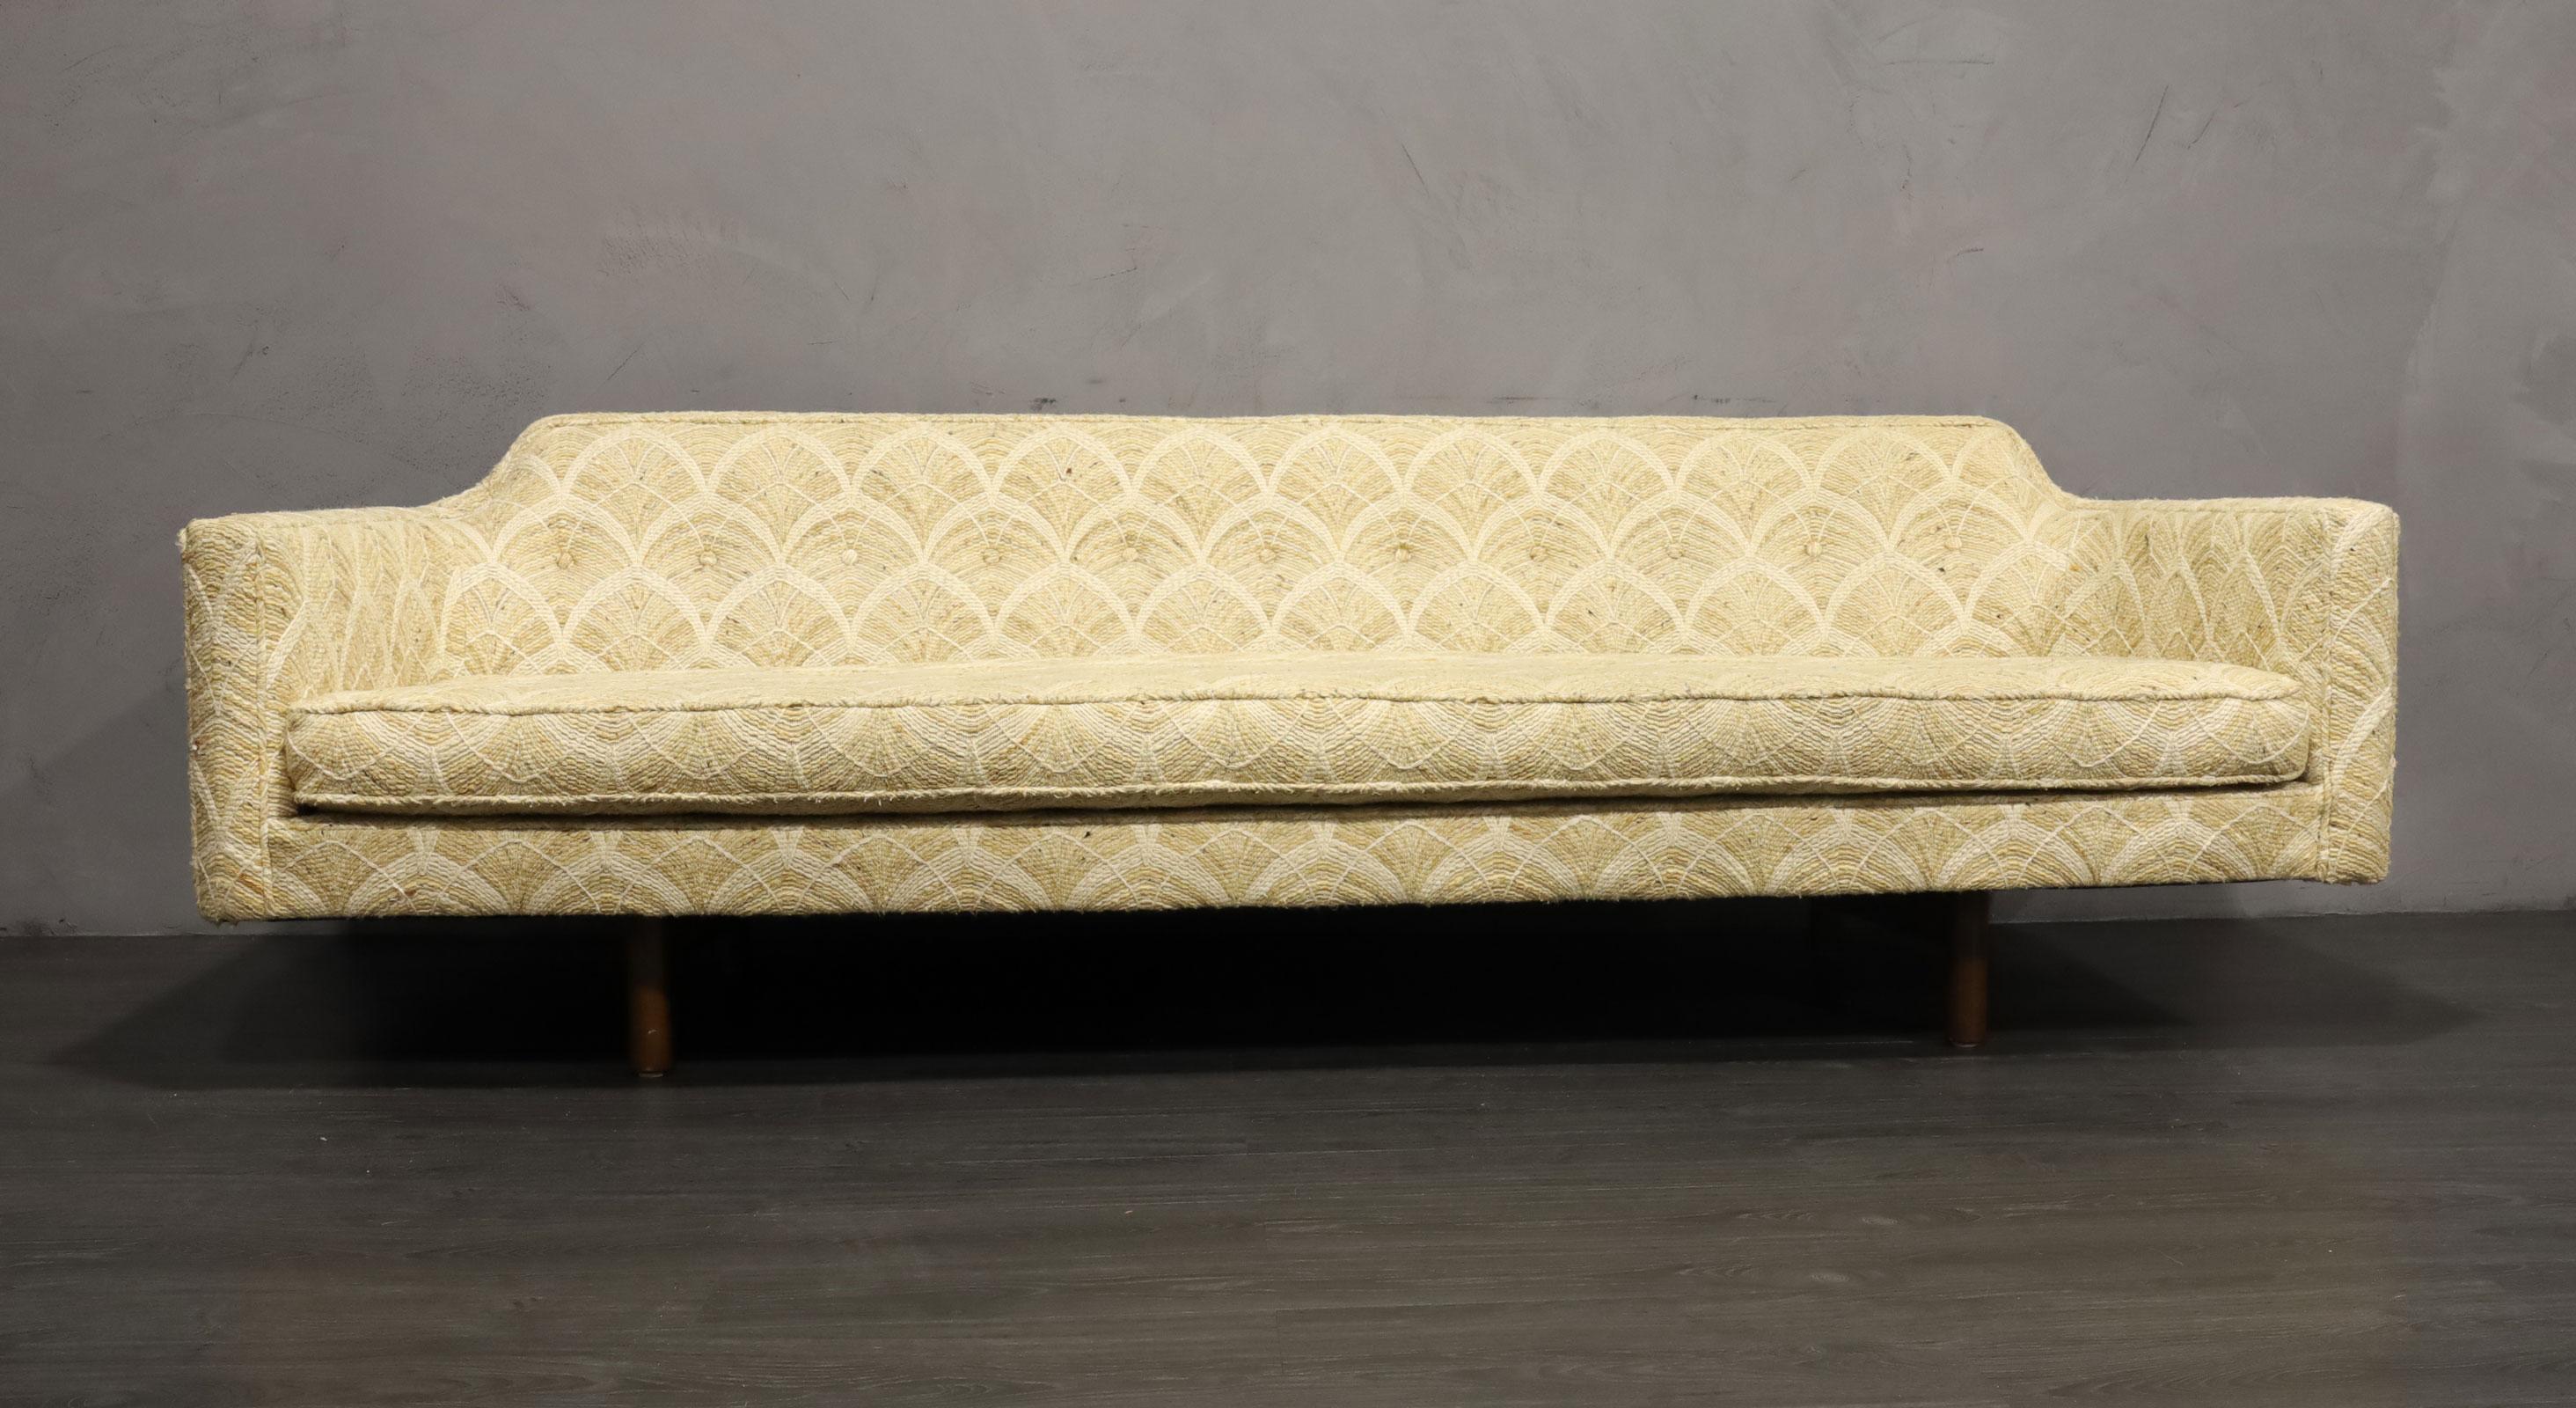 This sofa has beautiful lines and a gently curved back. A true classic. The fabric is original and in very good condition. It is a rich and high-quality texture that looks like embroidery so if it works with your decor I would leave as is. It can